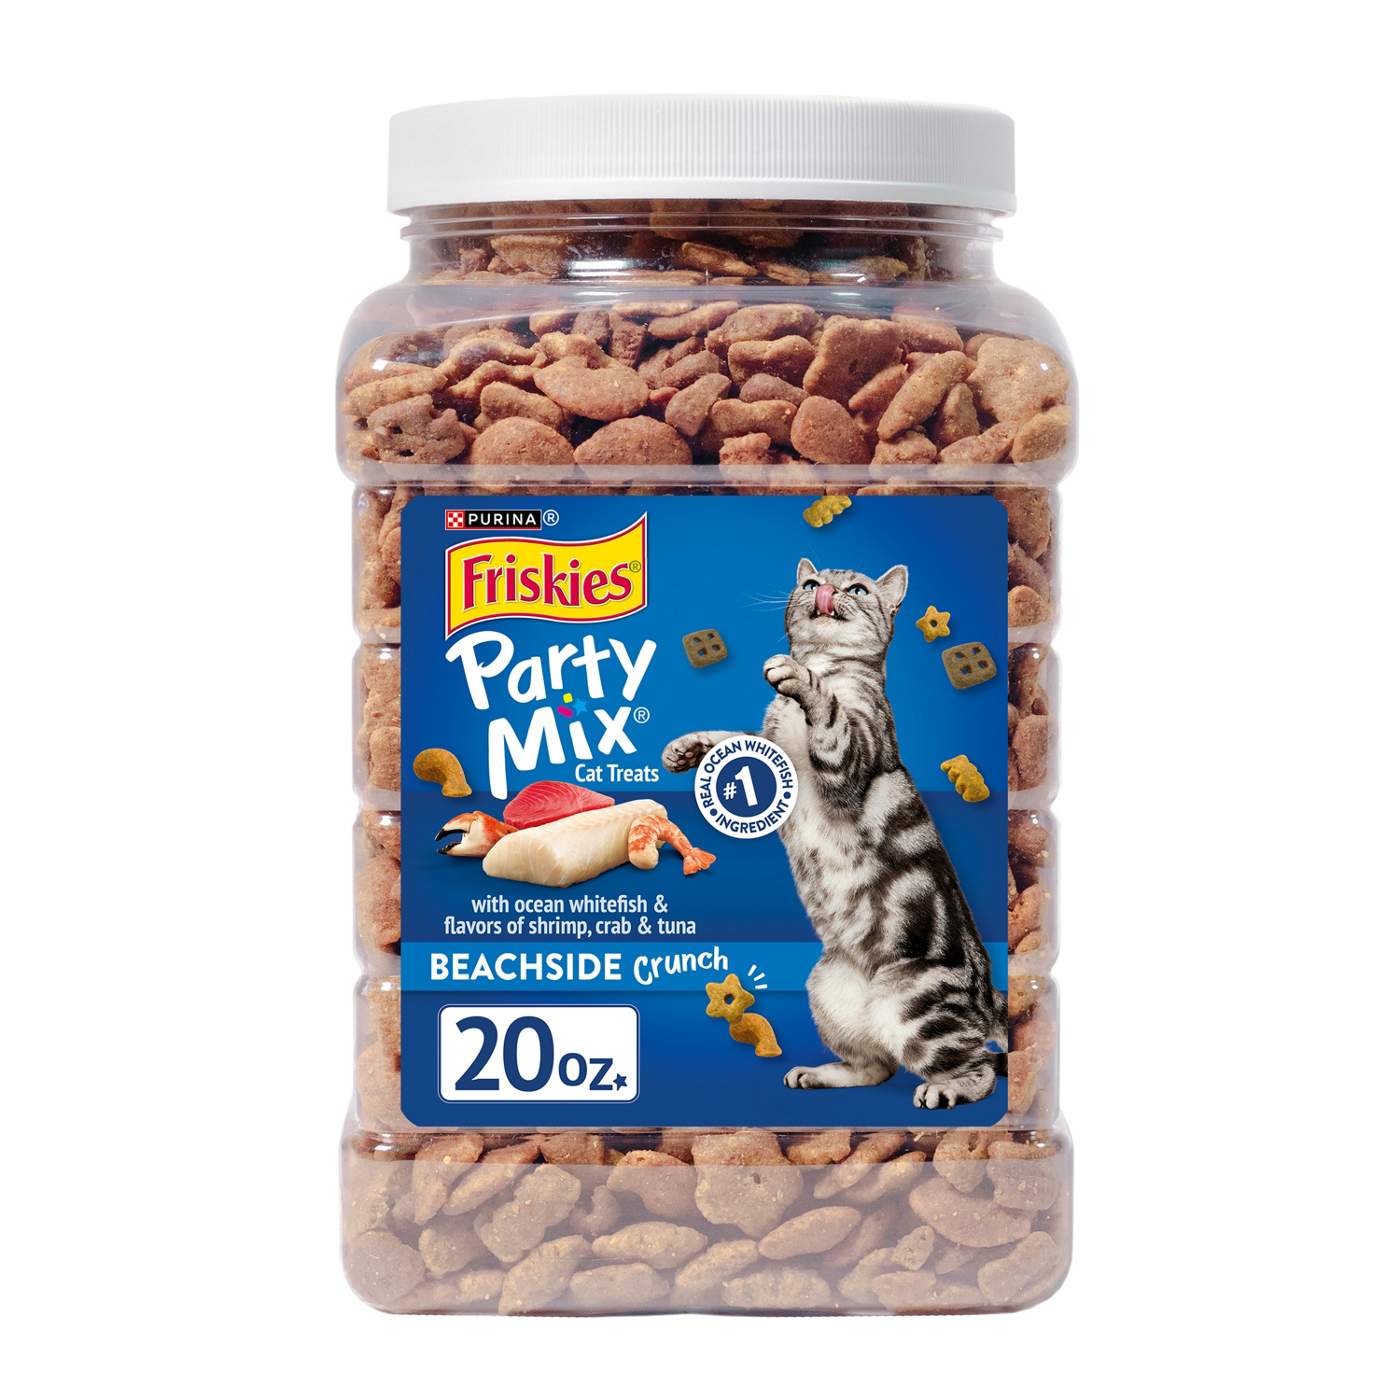 Friskies Purina Friskies Made in USA Facilities Cat Treats, Party Mix Beachside Crunch; image 1 of 5